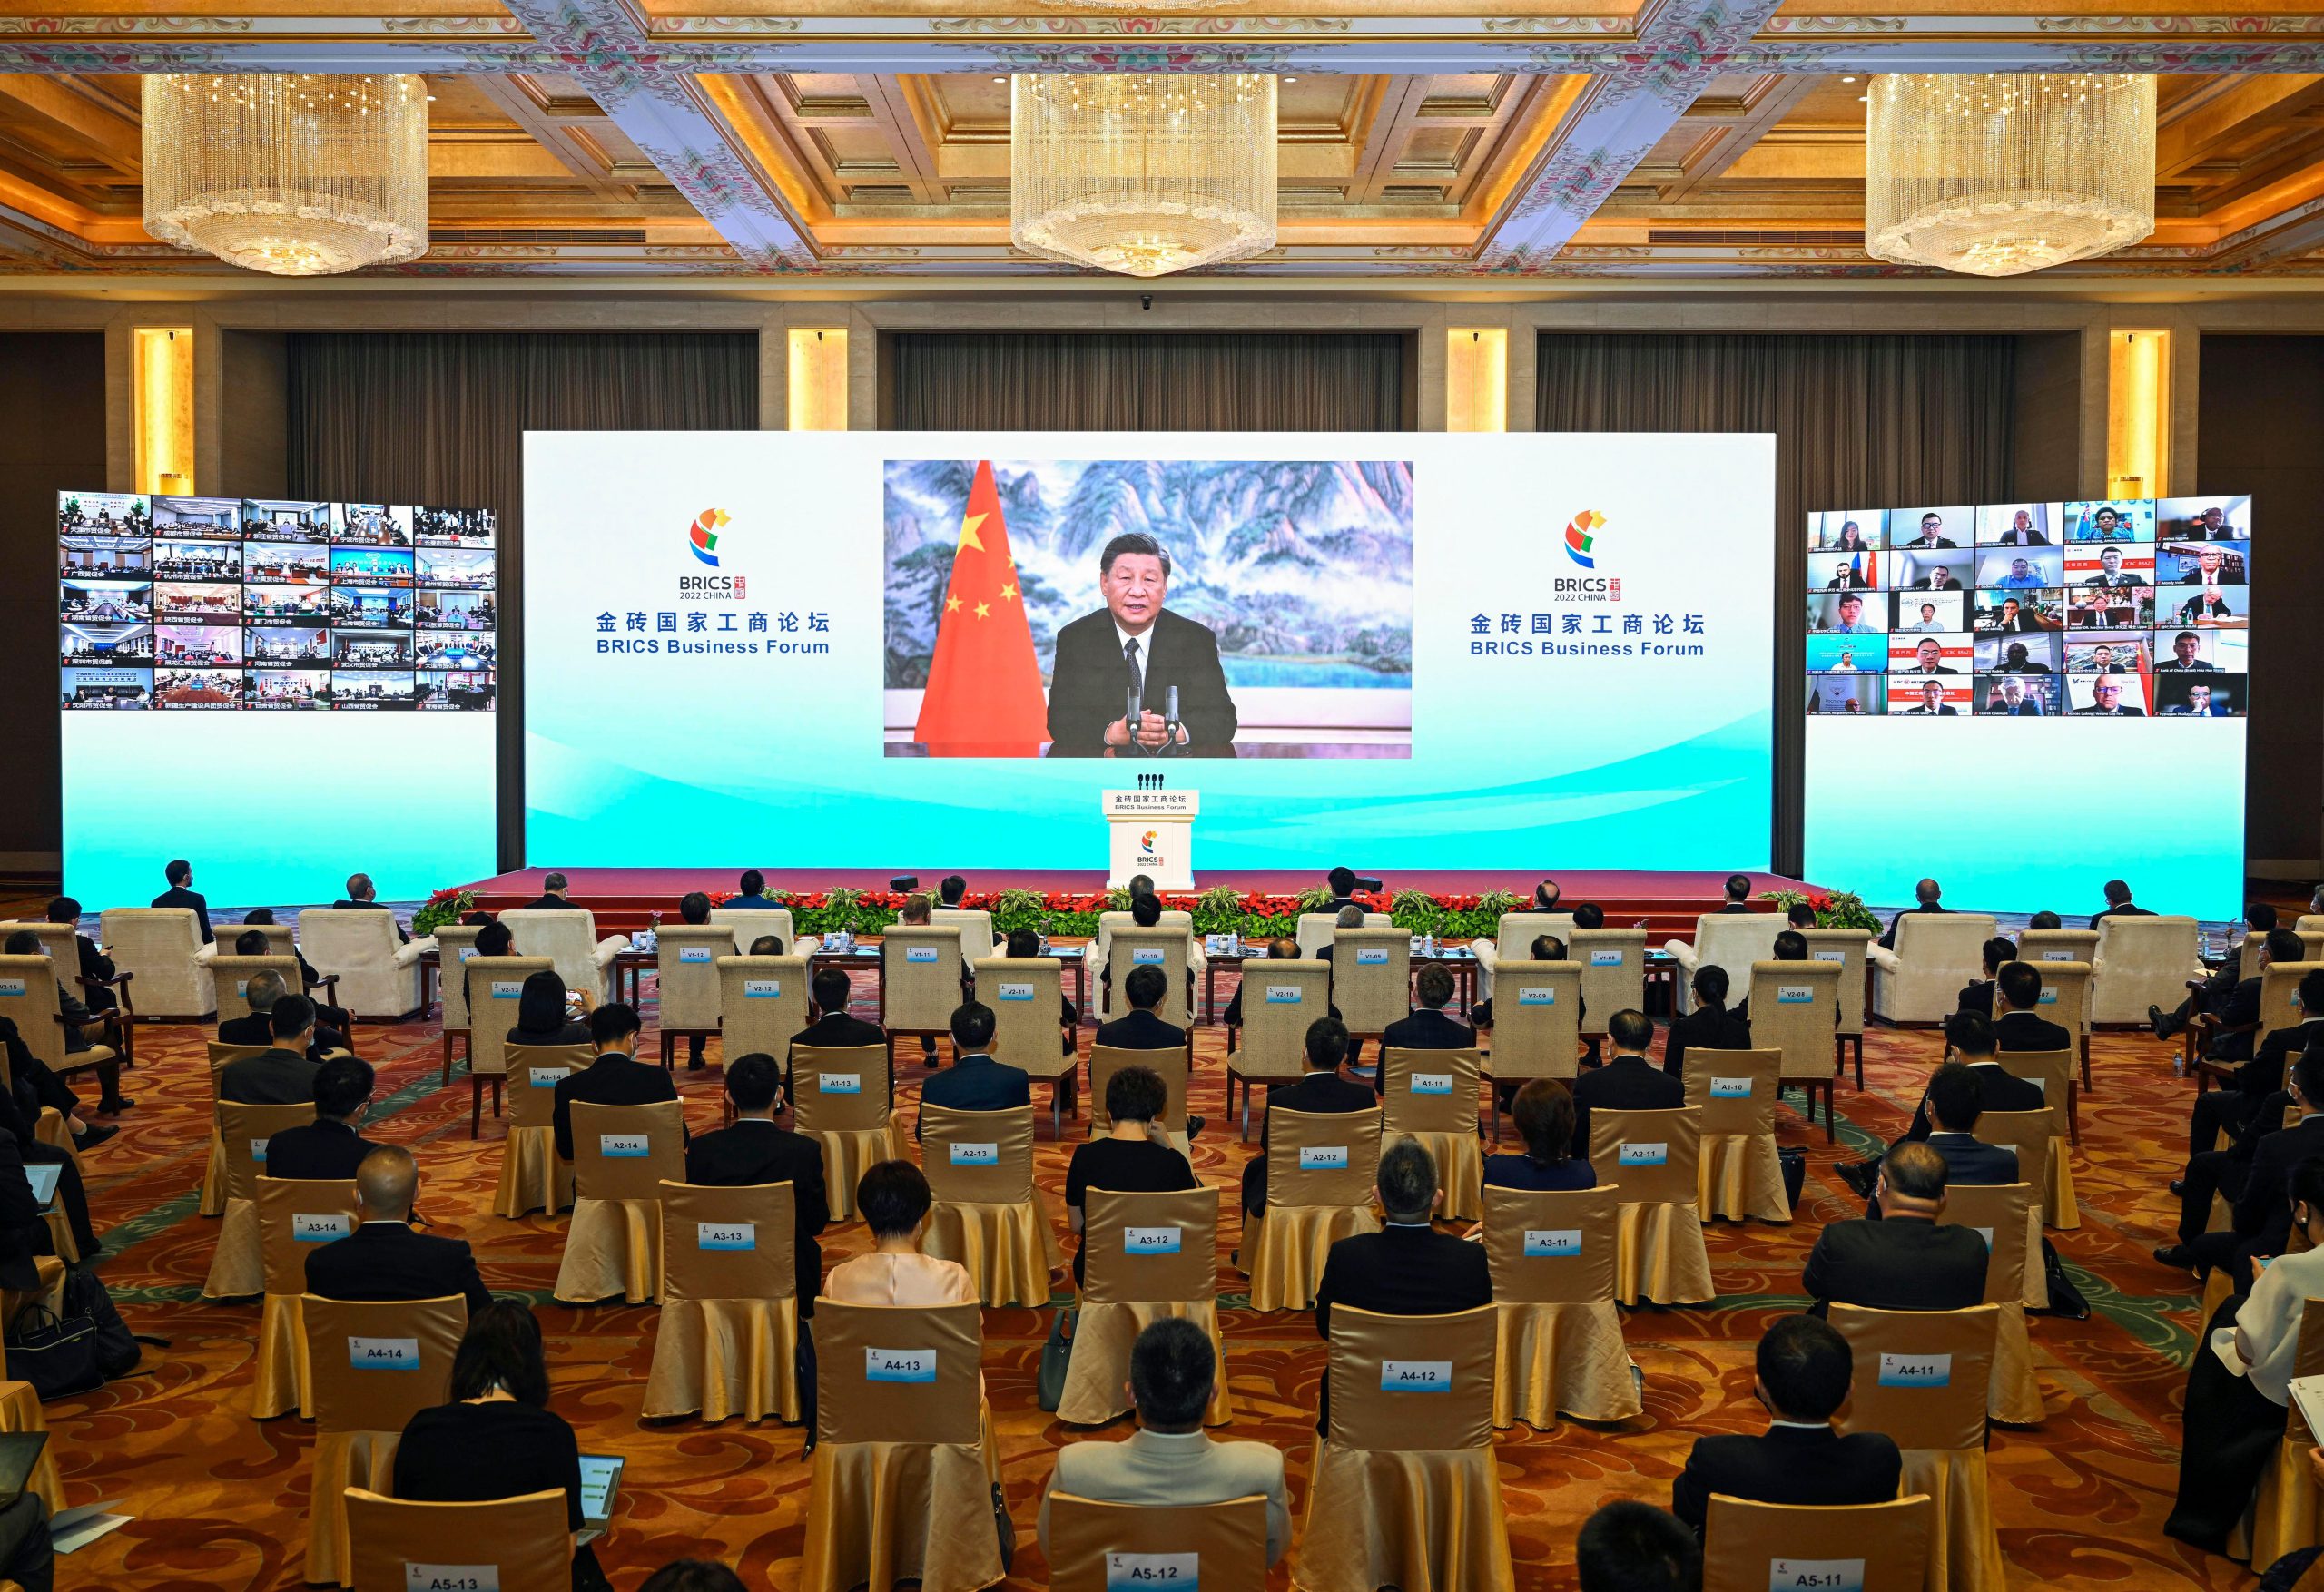 <p>Chinese president Xi Jinping delivers a virtual address to the BRICS Business Forum in Beijing, 22 June. The BRICS Summit can offer a forum for meaningful dialogue on energy cooperation, commentators say (Image: Yin Bogu / Xinhua / Alamy)</p>